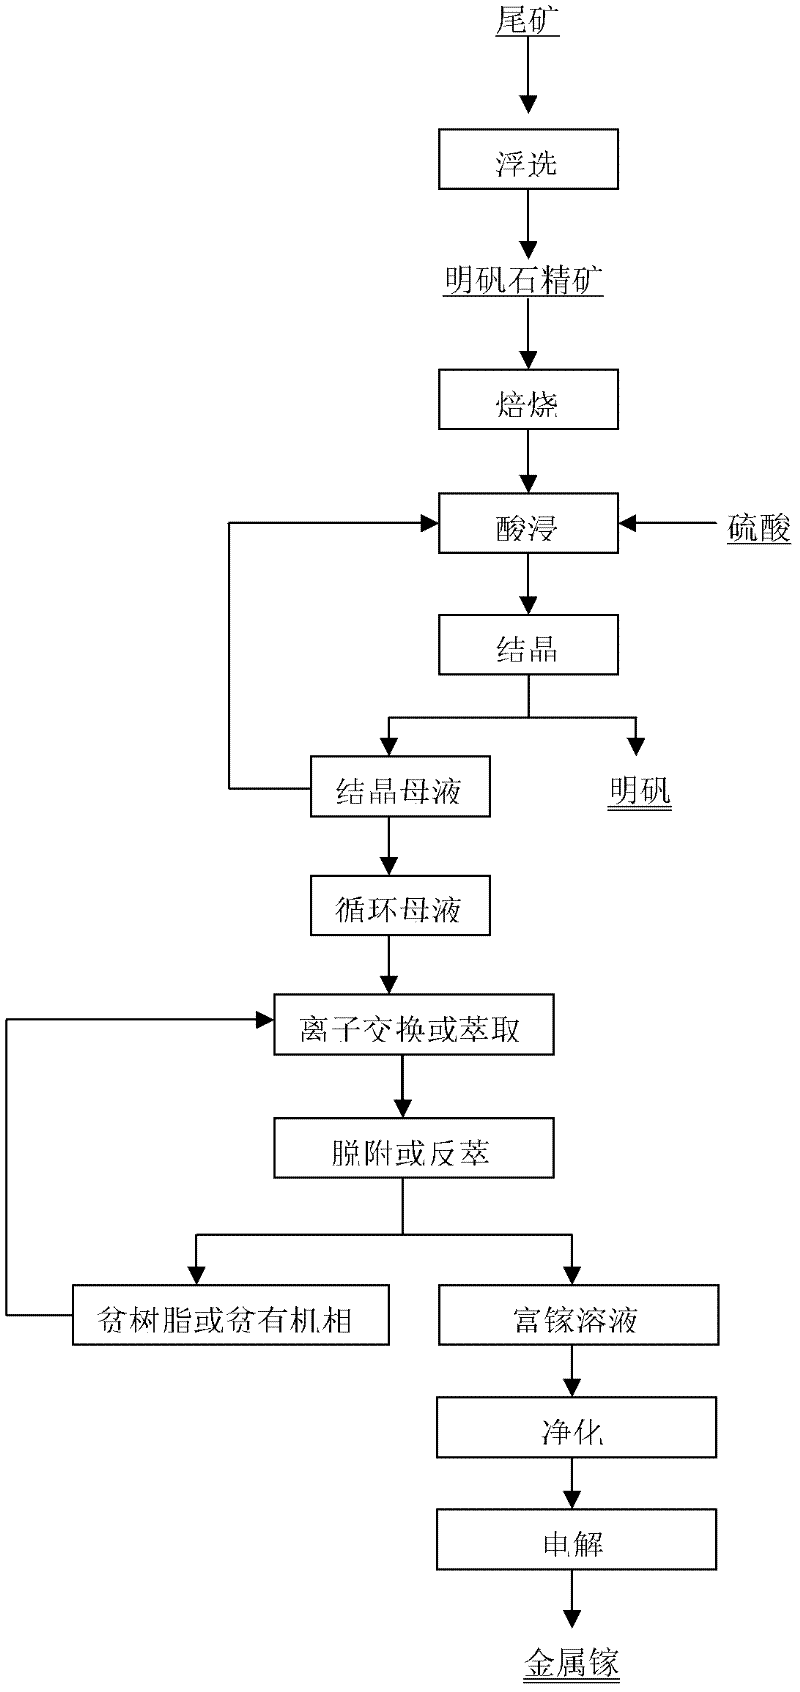 Method for recycling gallium in alunite concentrate